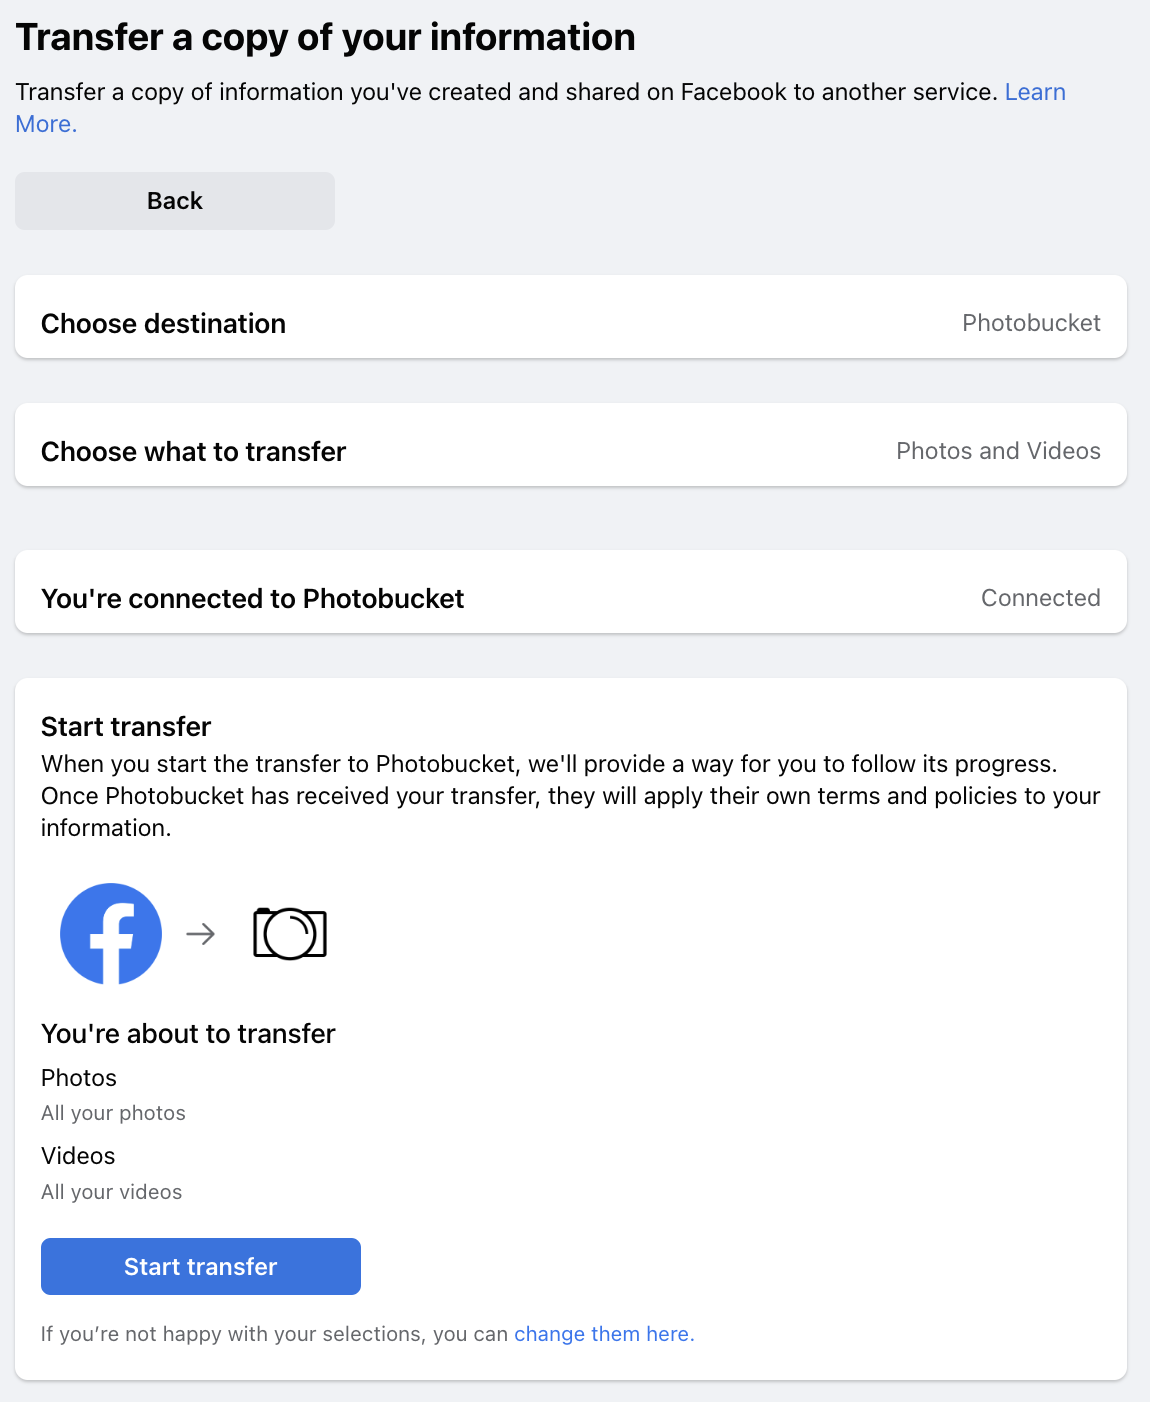 Transfer a copy of your information screen on Facebook with a prompt to Start transfer.